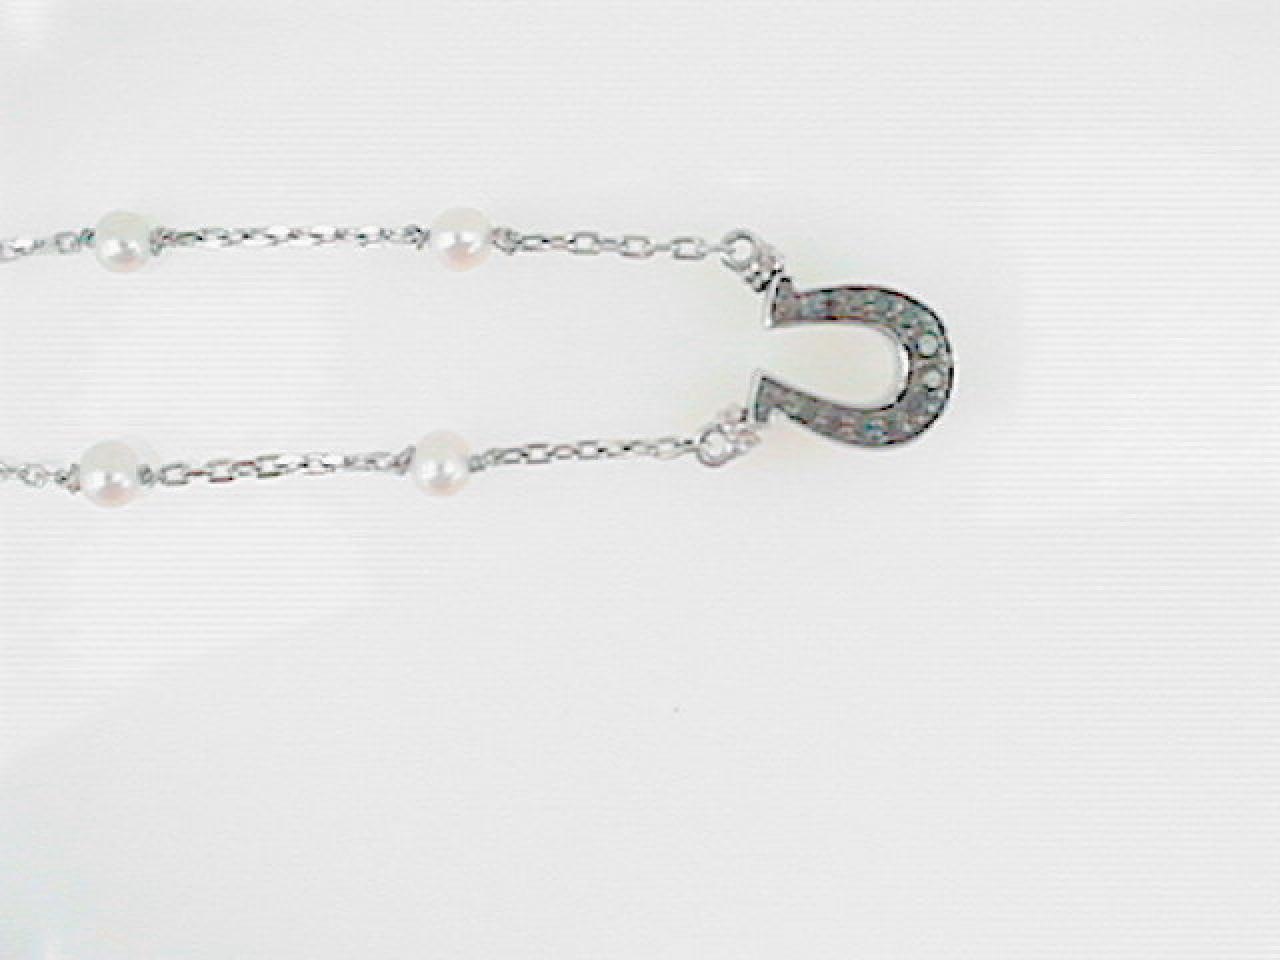 ANDREA CANDELA STERLING SILVER & 18K YELLOW GOLD HORSESHOE PENDANT WITH BLACK DIAMONDS ON A STERLING SILVER & PEARL CHAIN